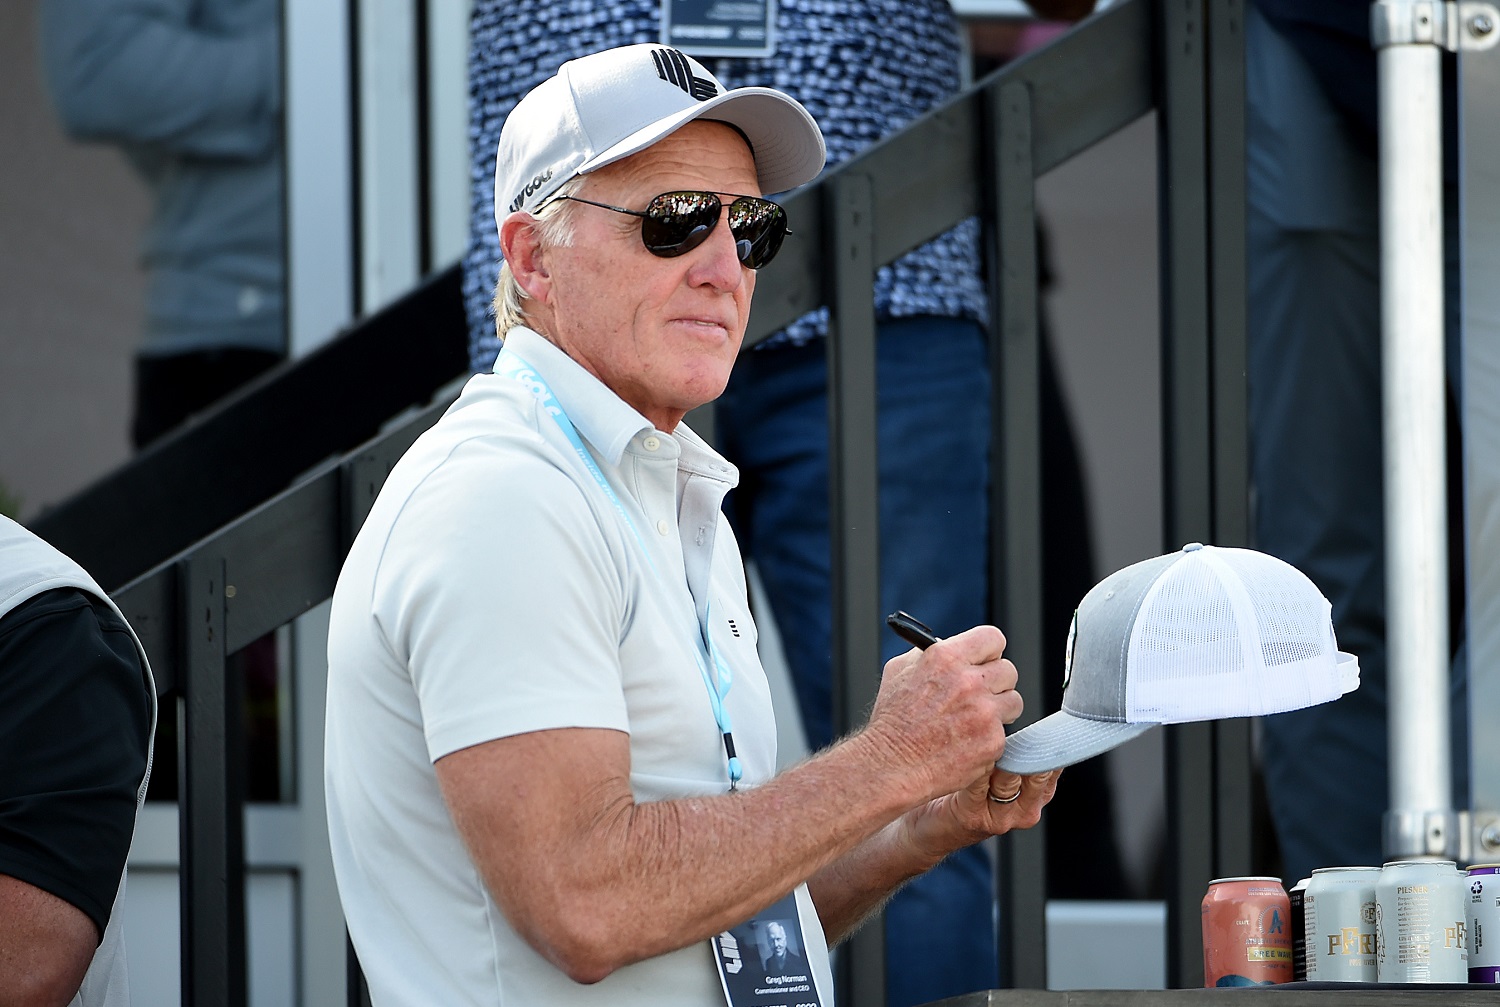 LIV Golf commissioner Greg Norman signs hats during the final round of the LIV Golf Invitational - Portland at Pumpkin Ridge Golf Club on July 2, 2022 in North Plains, Oregon.